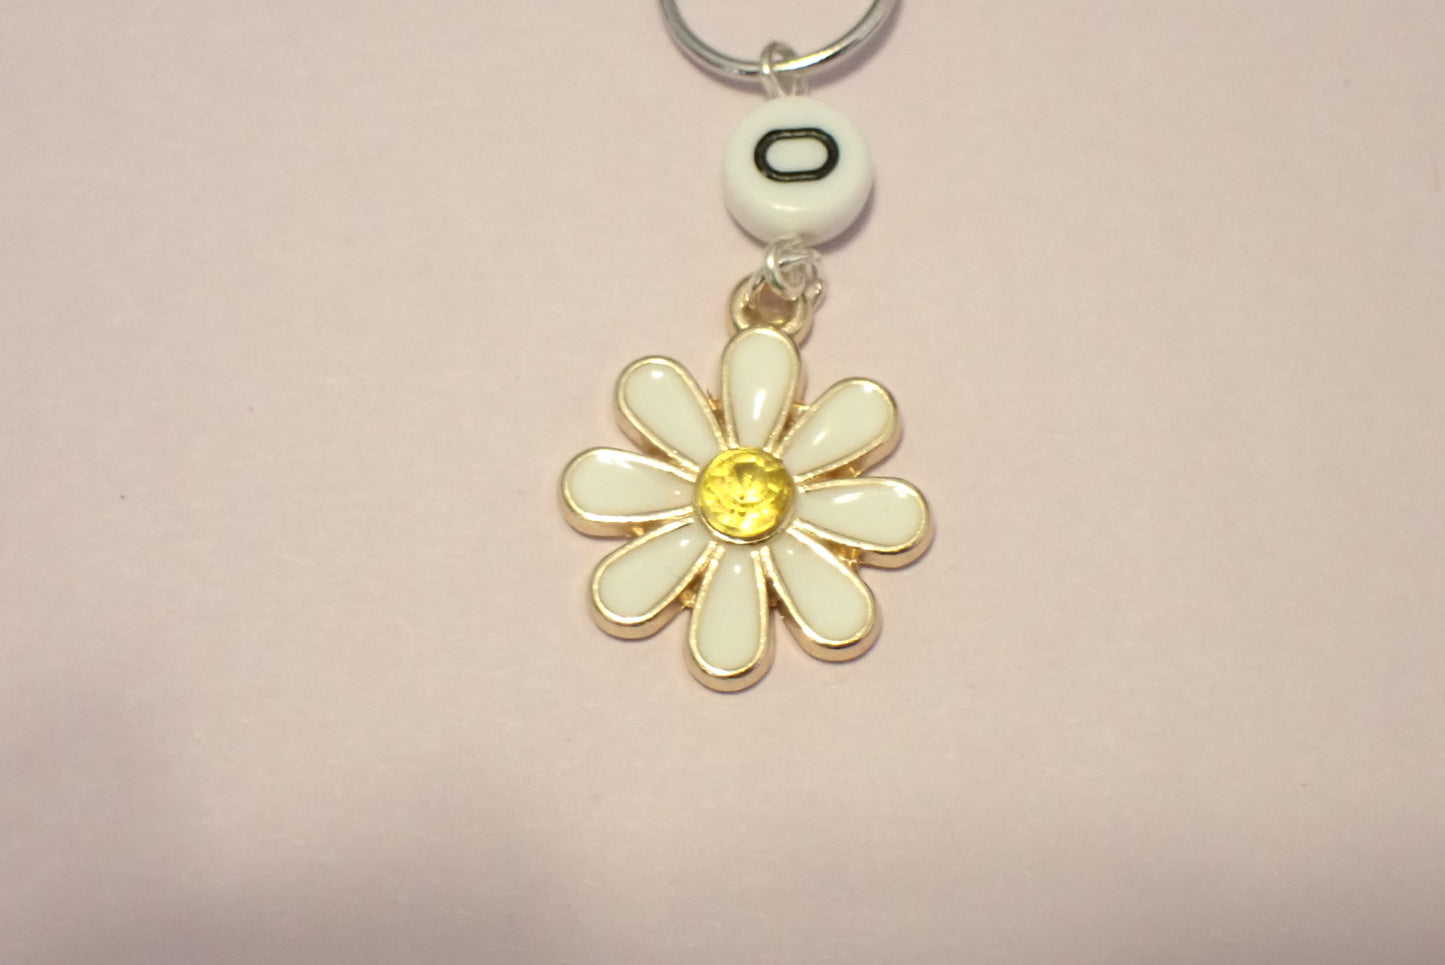 Row Counter Chain for Knit or Crochet, with Gold Color background, White Daisy Charm